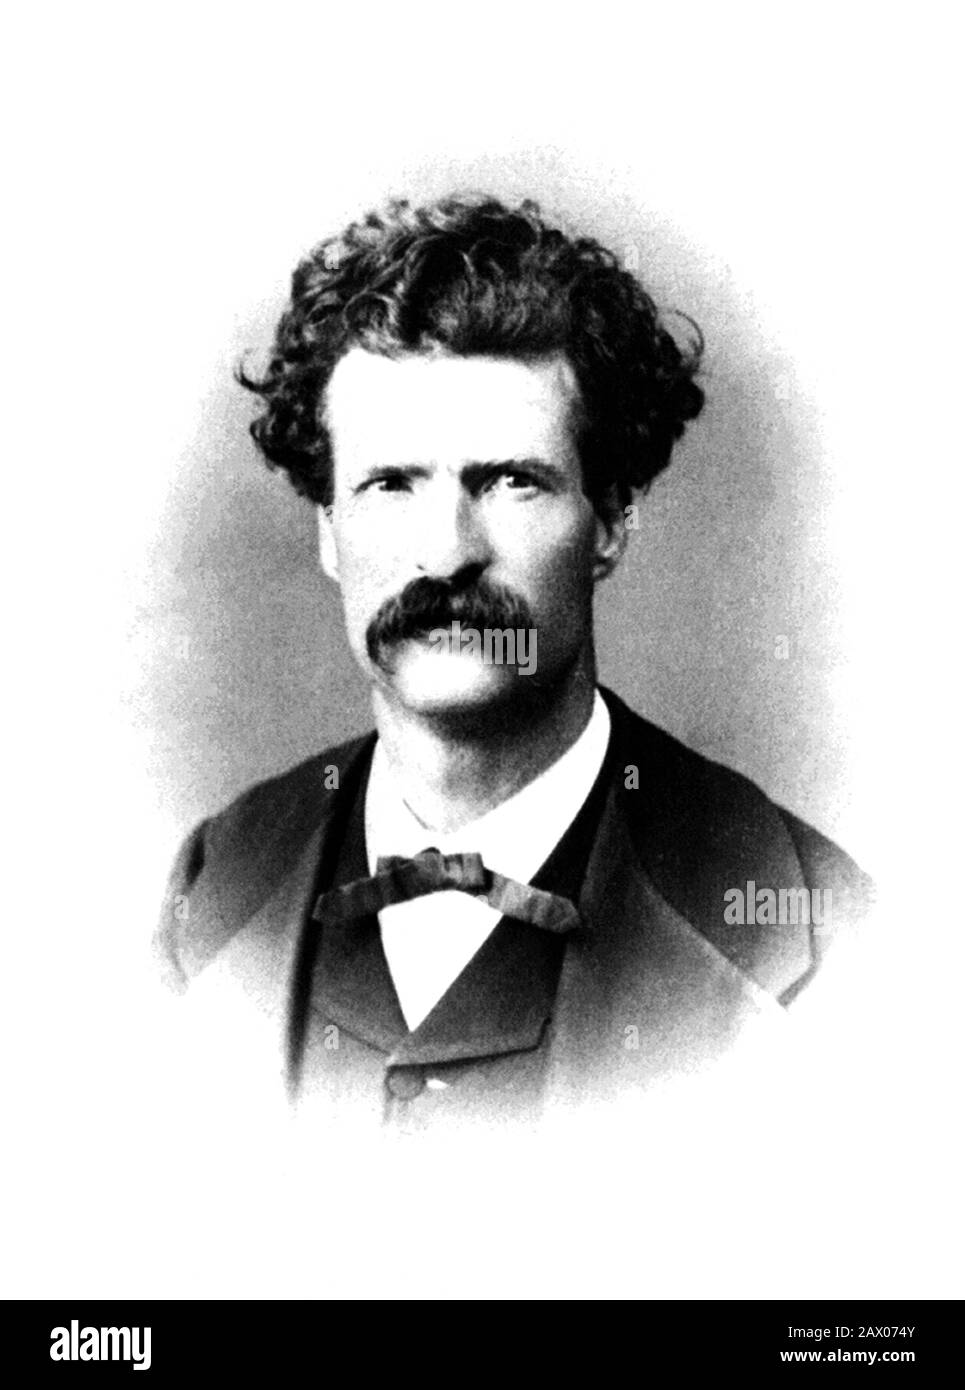 Vintage portrait photo of American writer and humourist Samuel Langhorne Clemens (1835 – 1910), better known by his pen name of Mark Twain. Photo taken in Constantinople in September 1867 by Abdullah Frères, official photographers to the Sultan of Turkey. Stock Photo